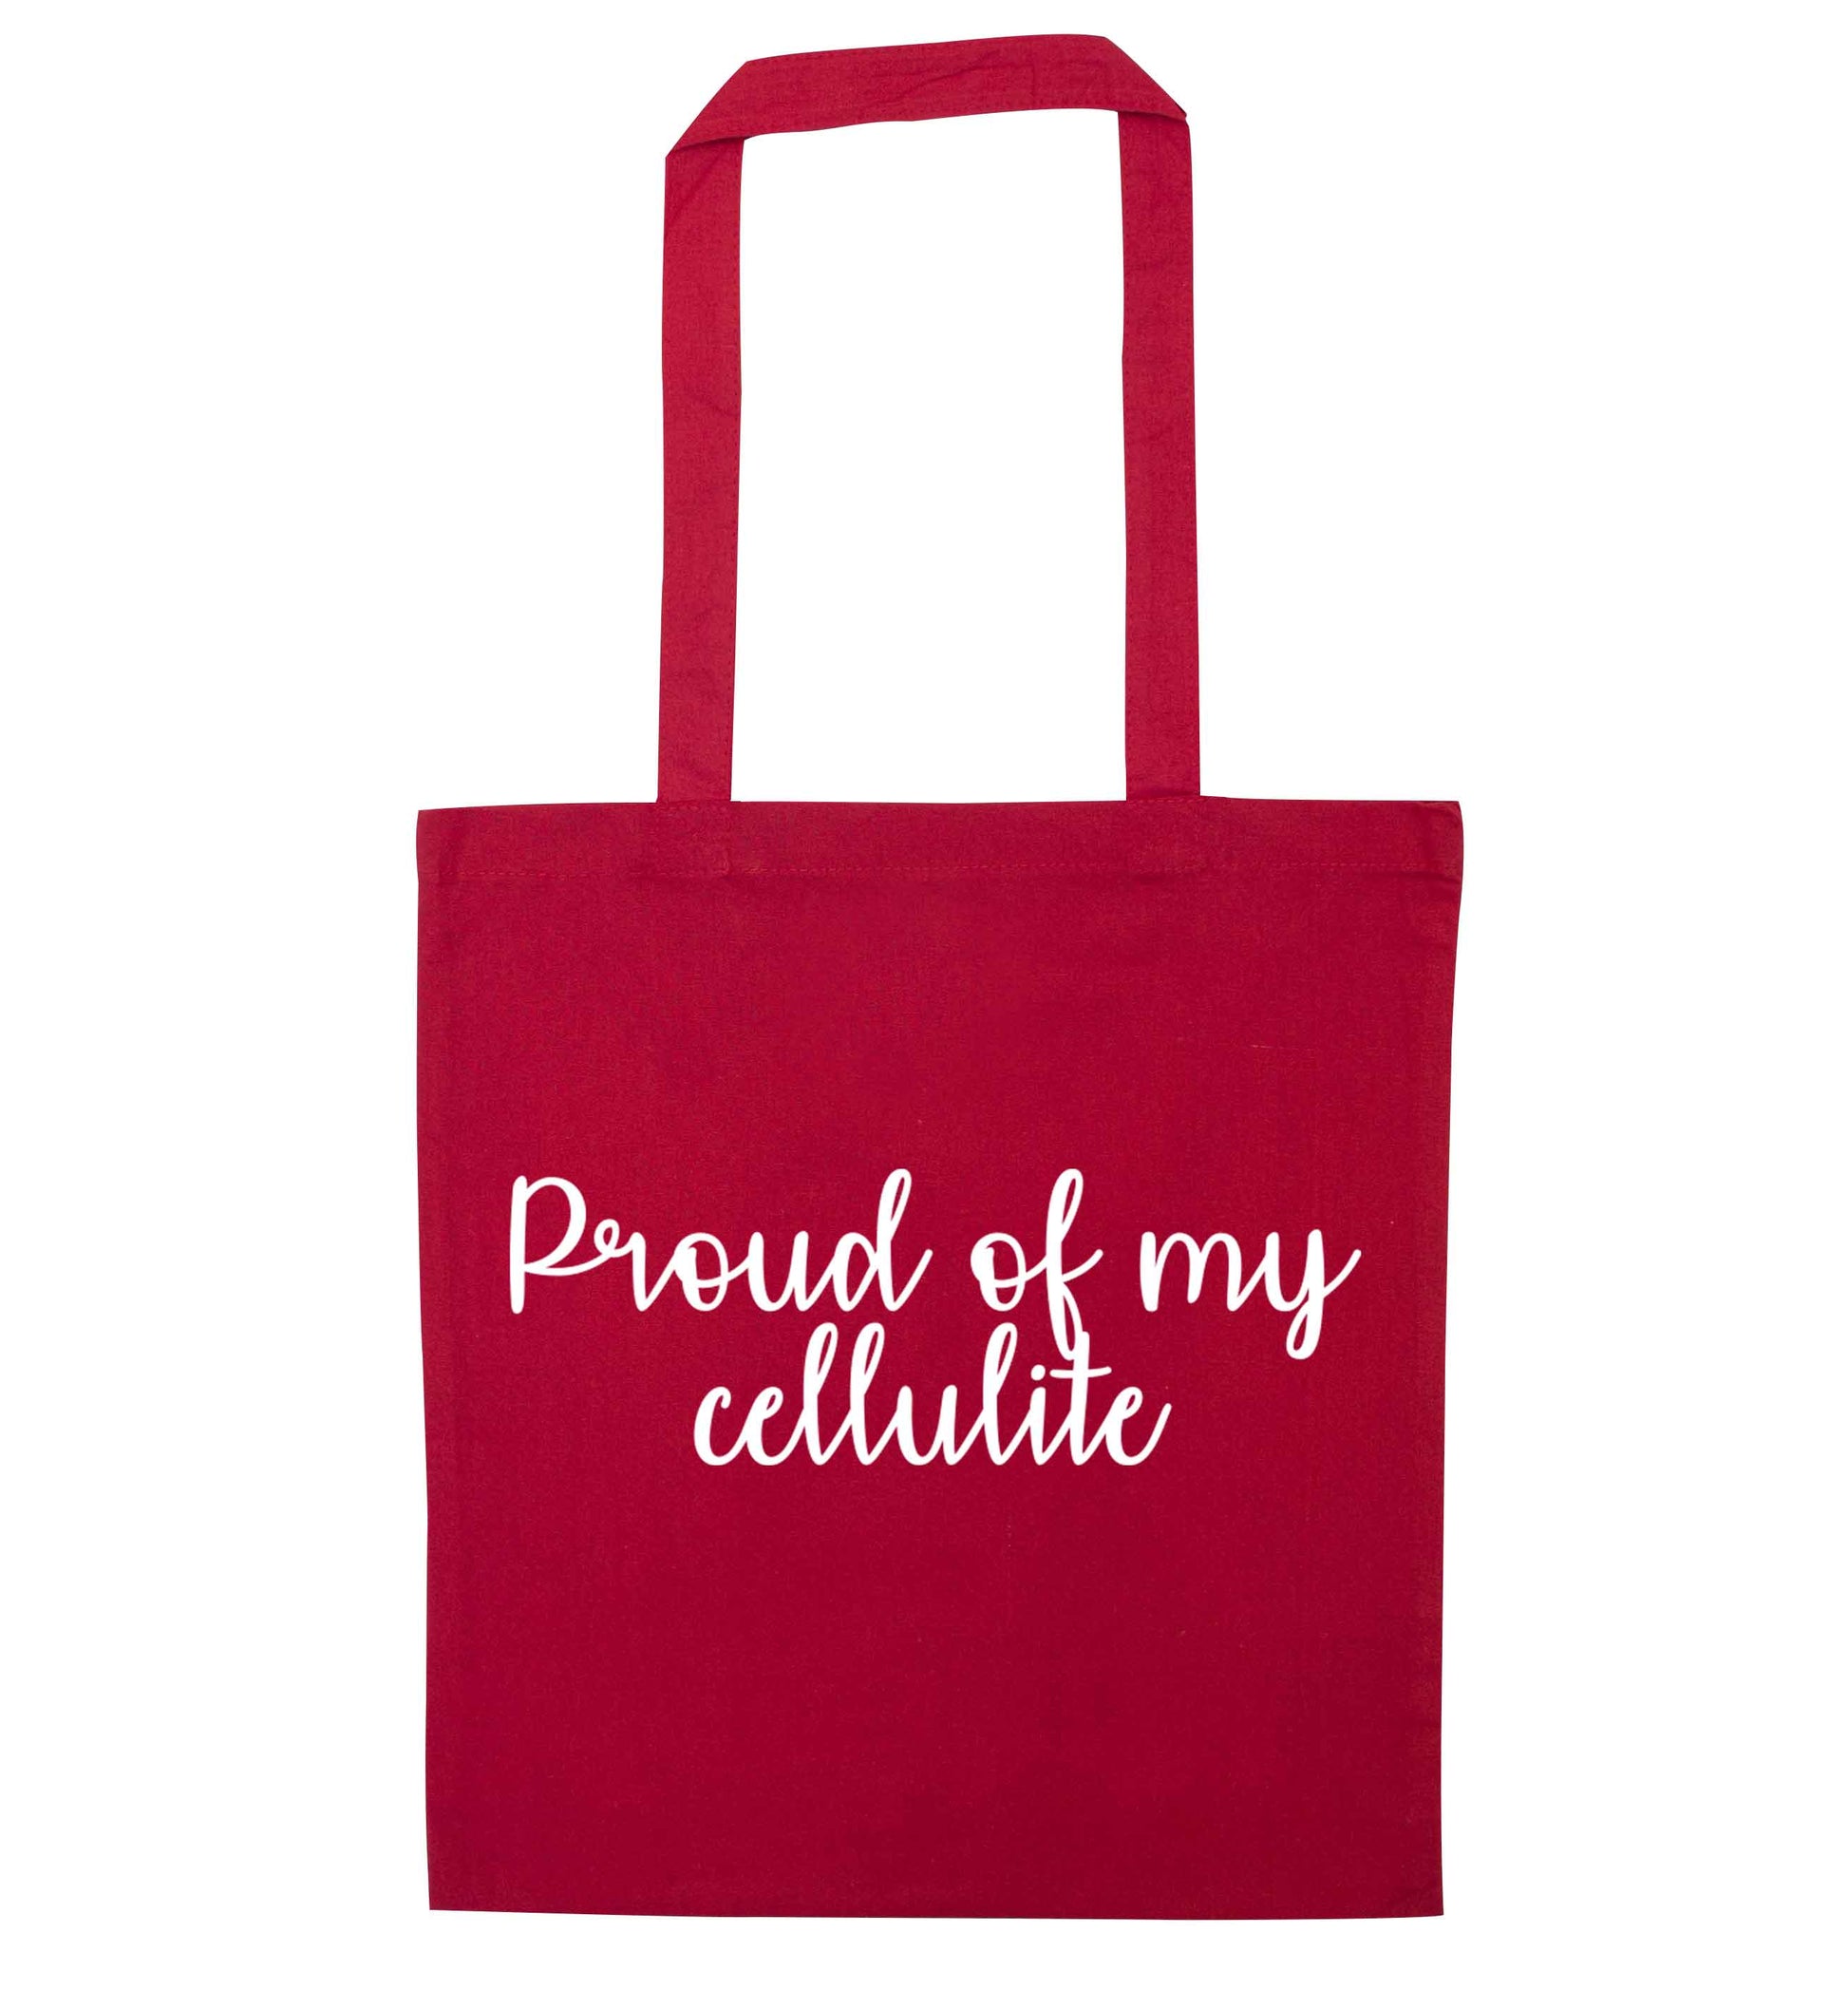 Proud of my cellulite red tote bag